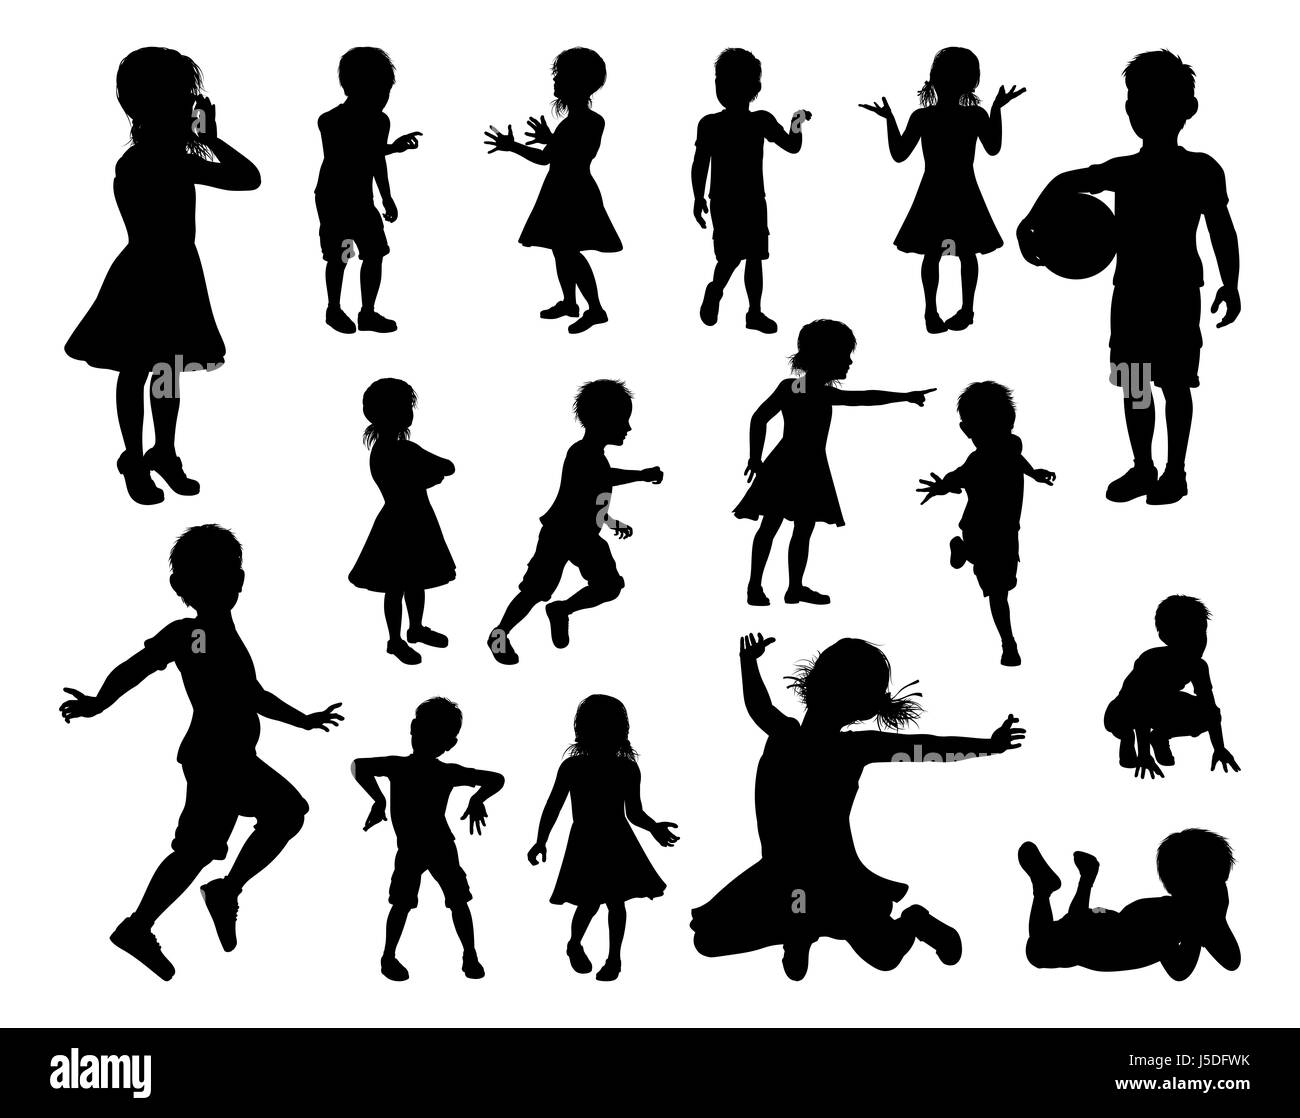 A set of high quality detailed silhouettes of kids or children in various poses Stock Photo